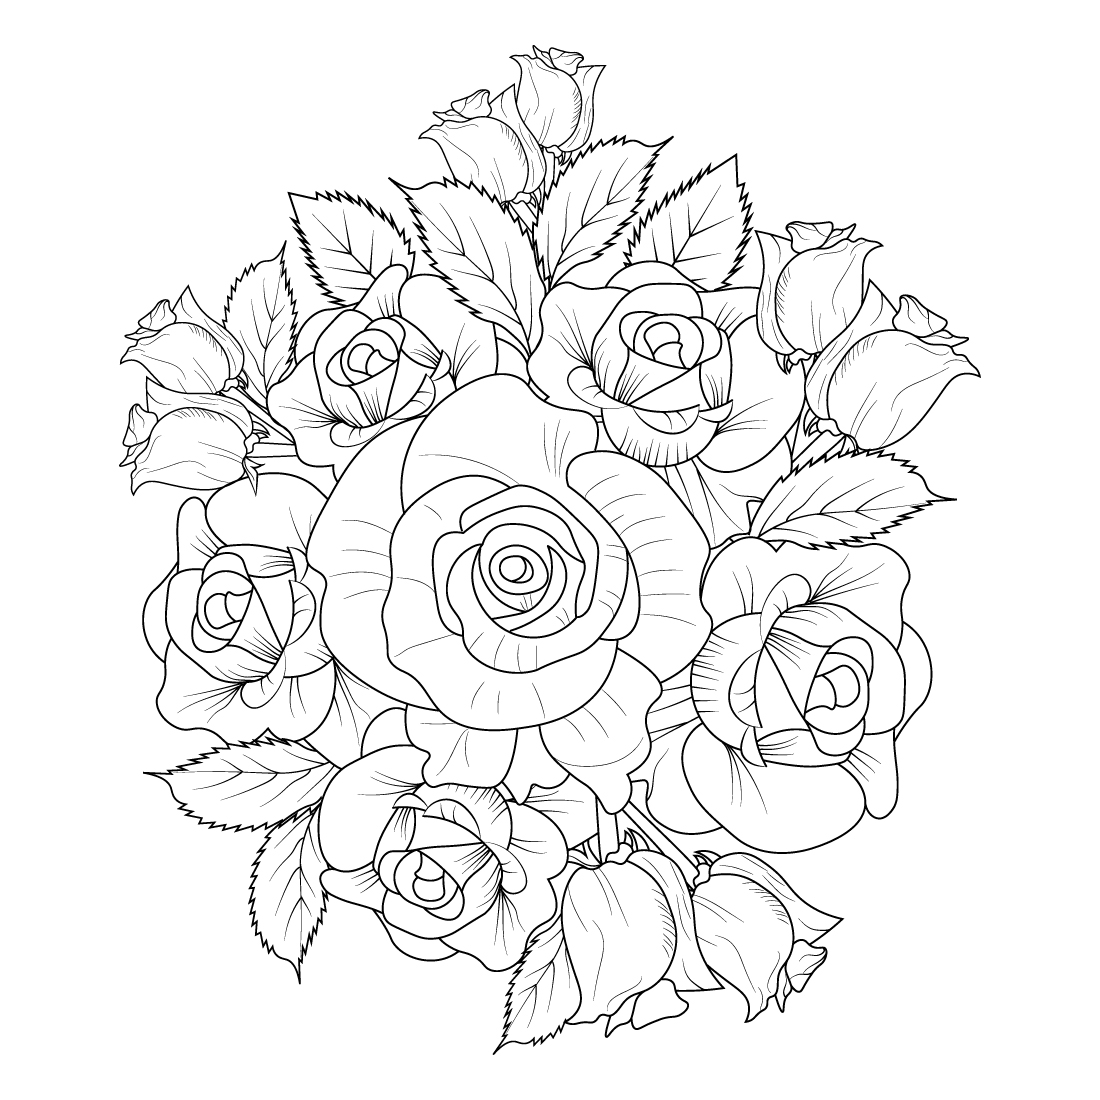 How to Draw a Bouquet of Roses VIDEO & Step-by-Step Pictures